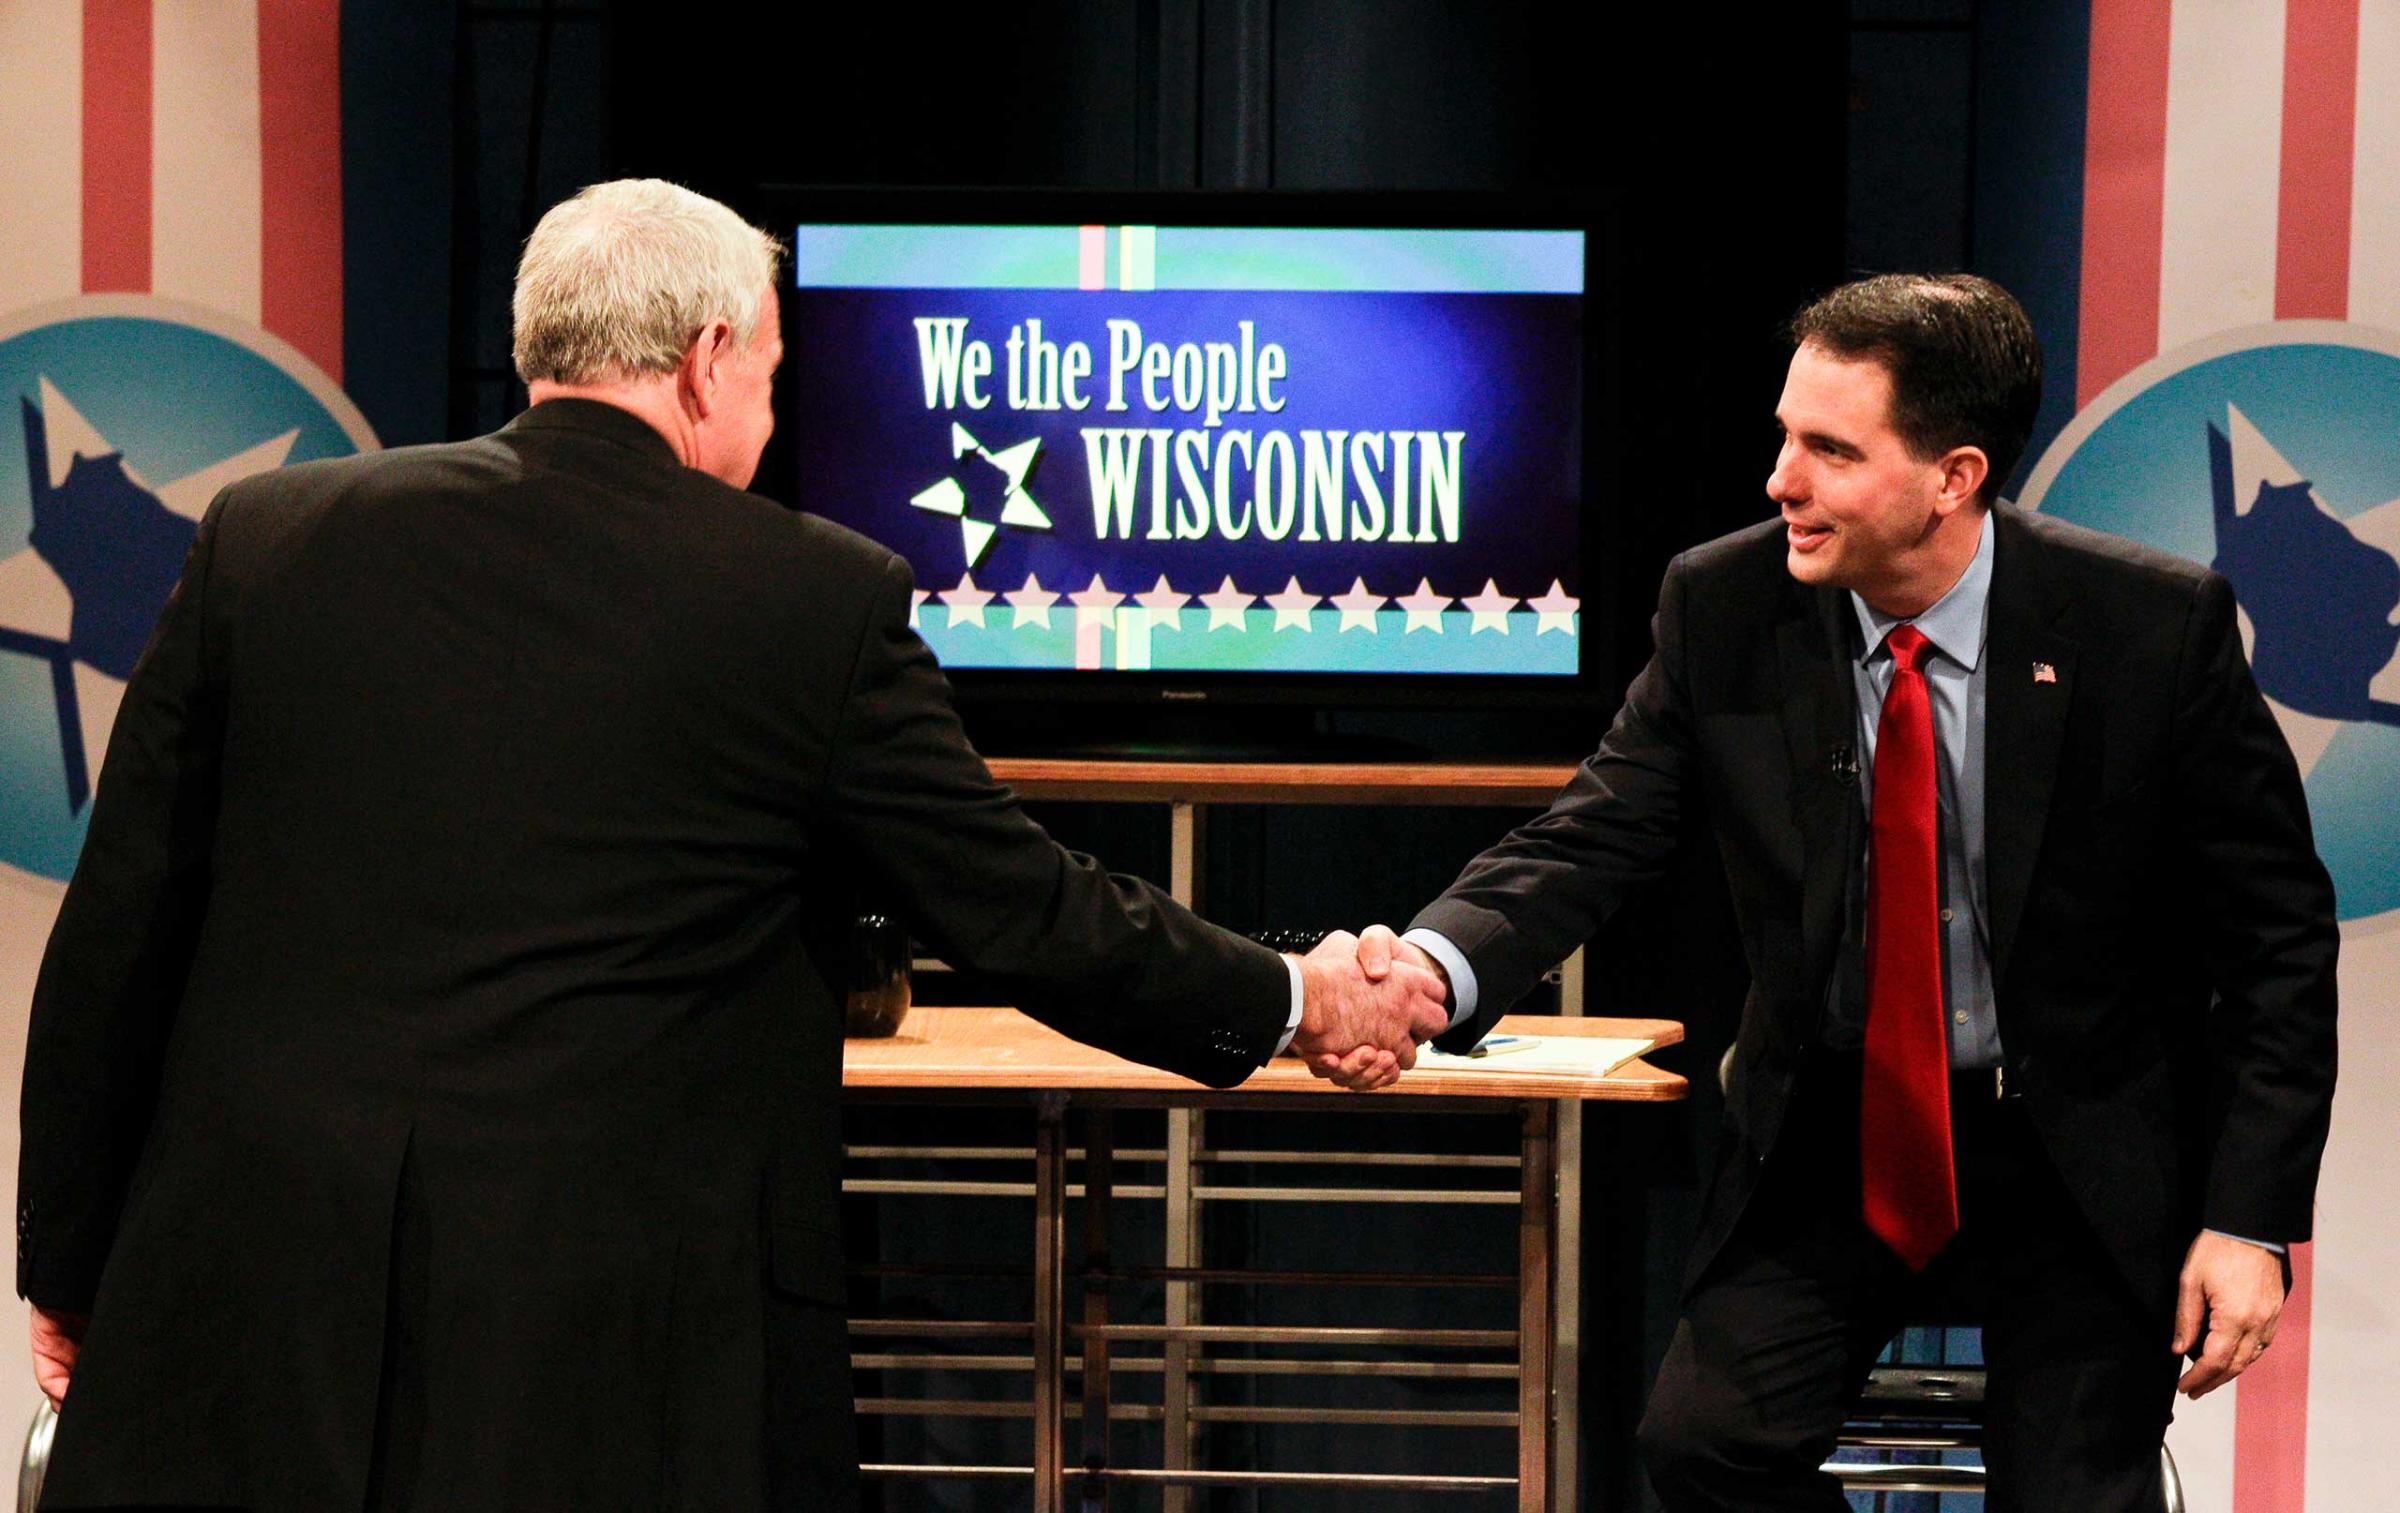 Wisconsin Governor candidates Milwaukee Mayor Tom Barrett, left, and Milwaukee County Executive Scott Walker greet each other before their final debate in Madison, Wis., on Oct. 29, 2010.